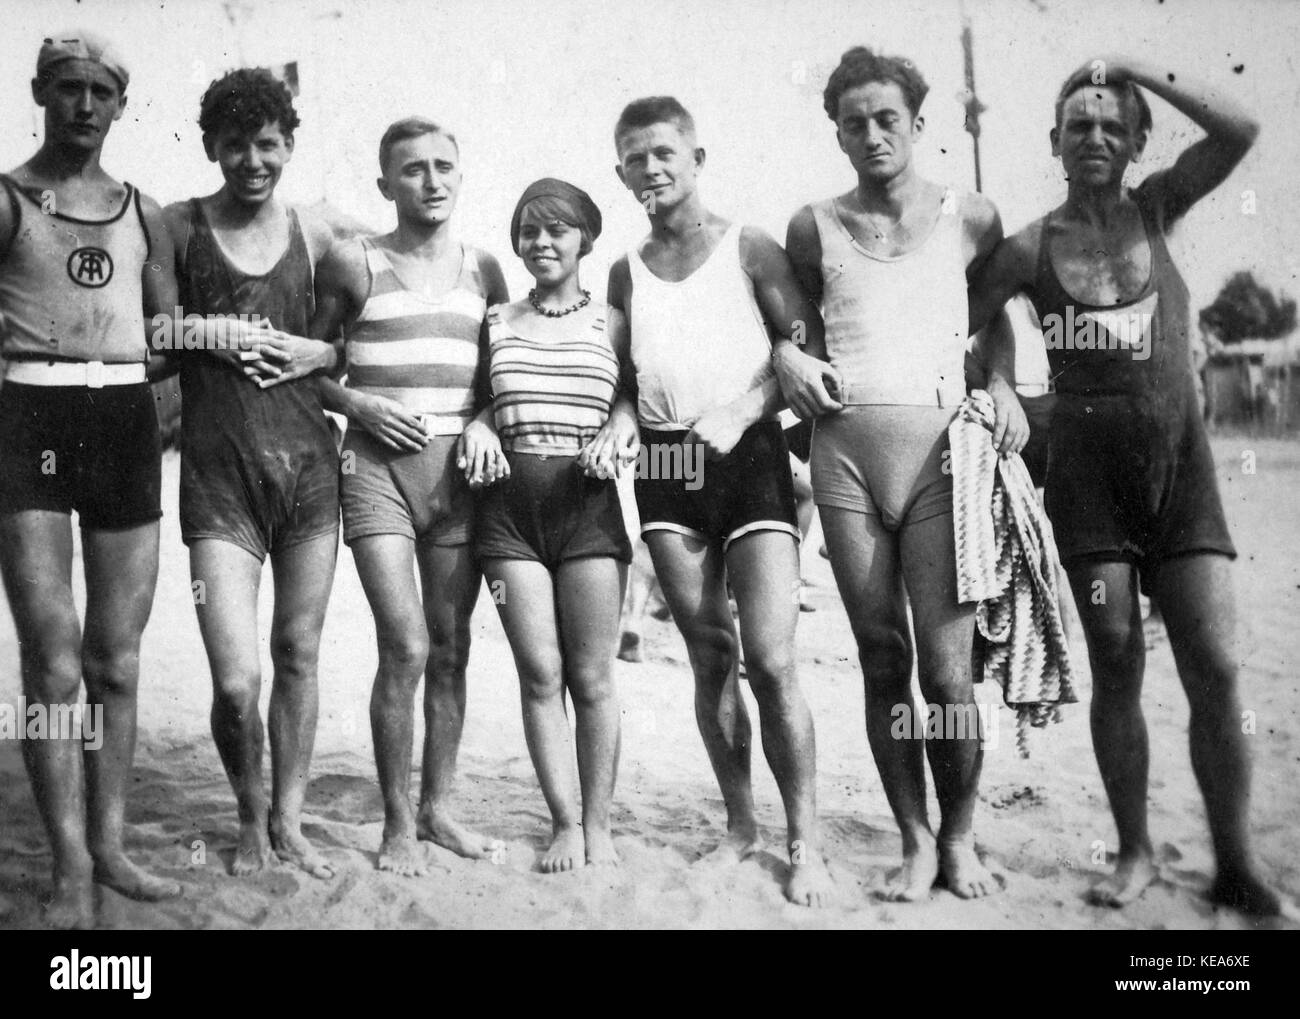 Vintage bathing suit man Black and White Stock Photos & Images - Alamy